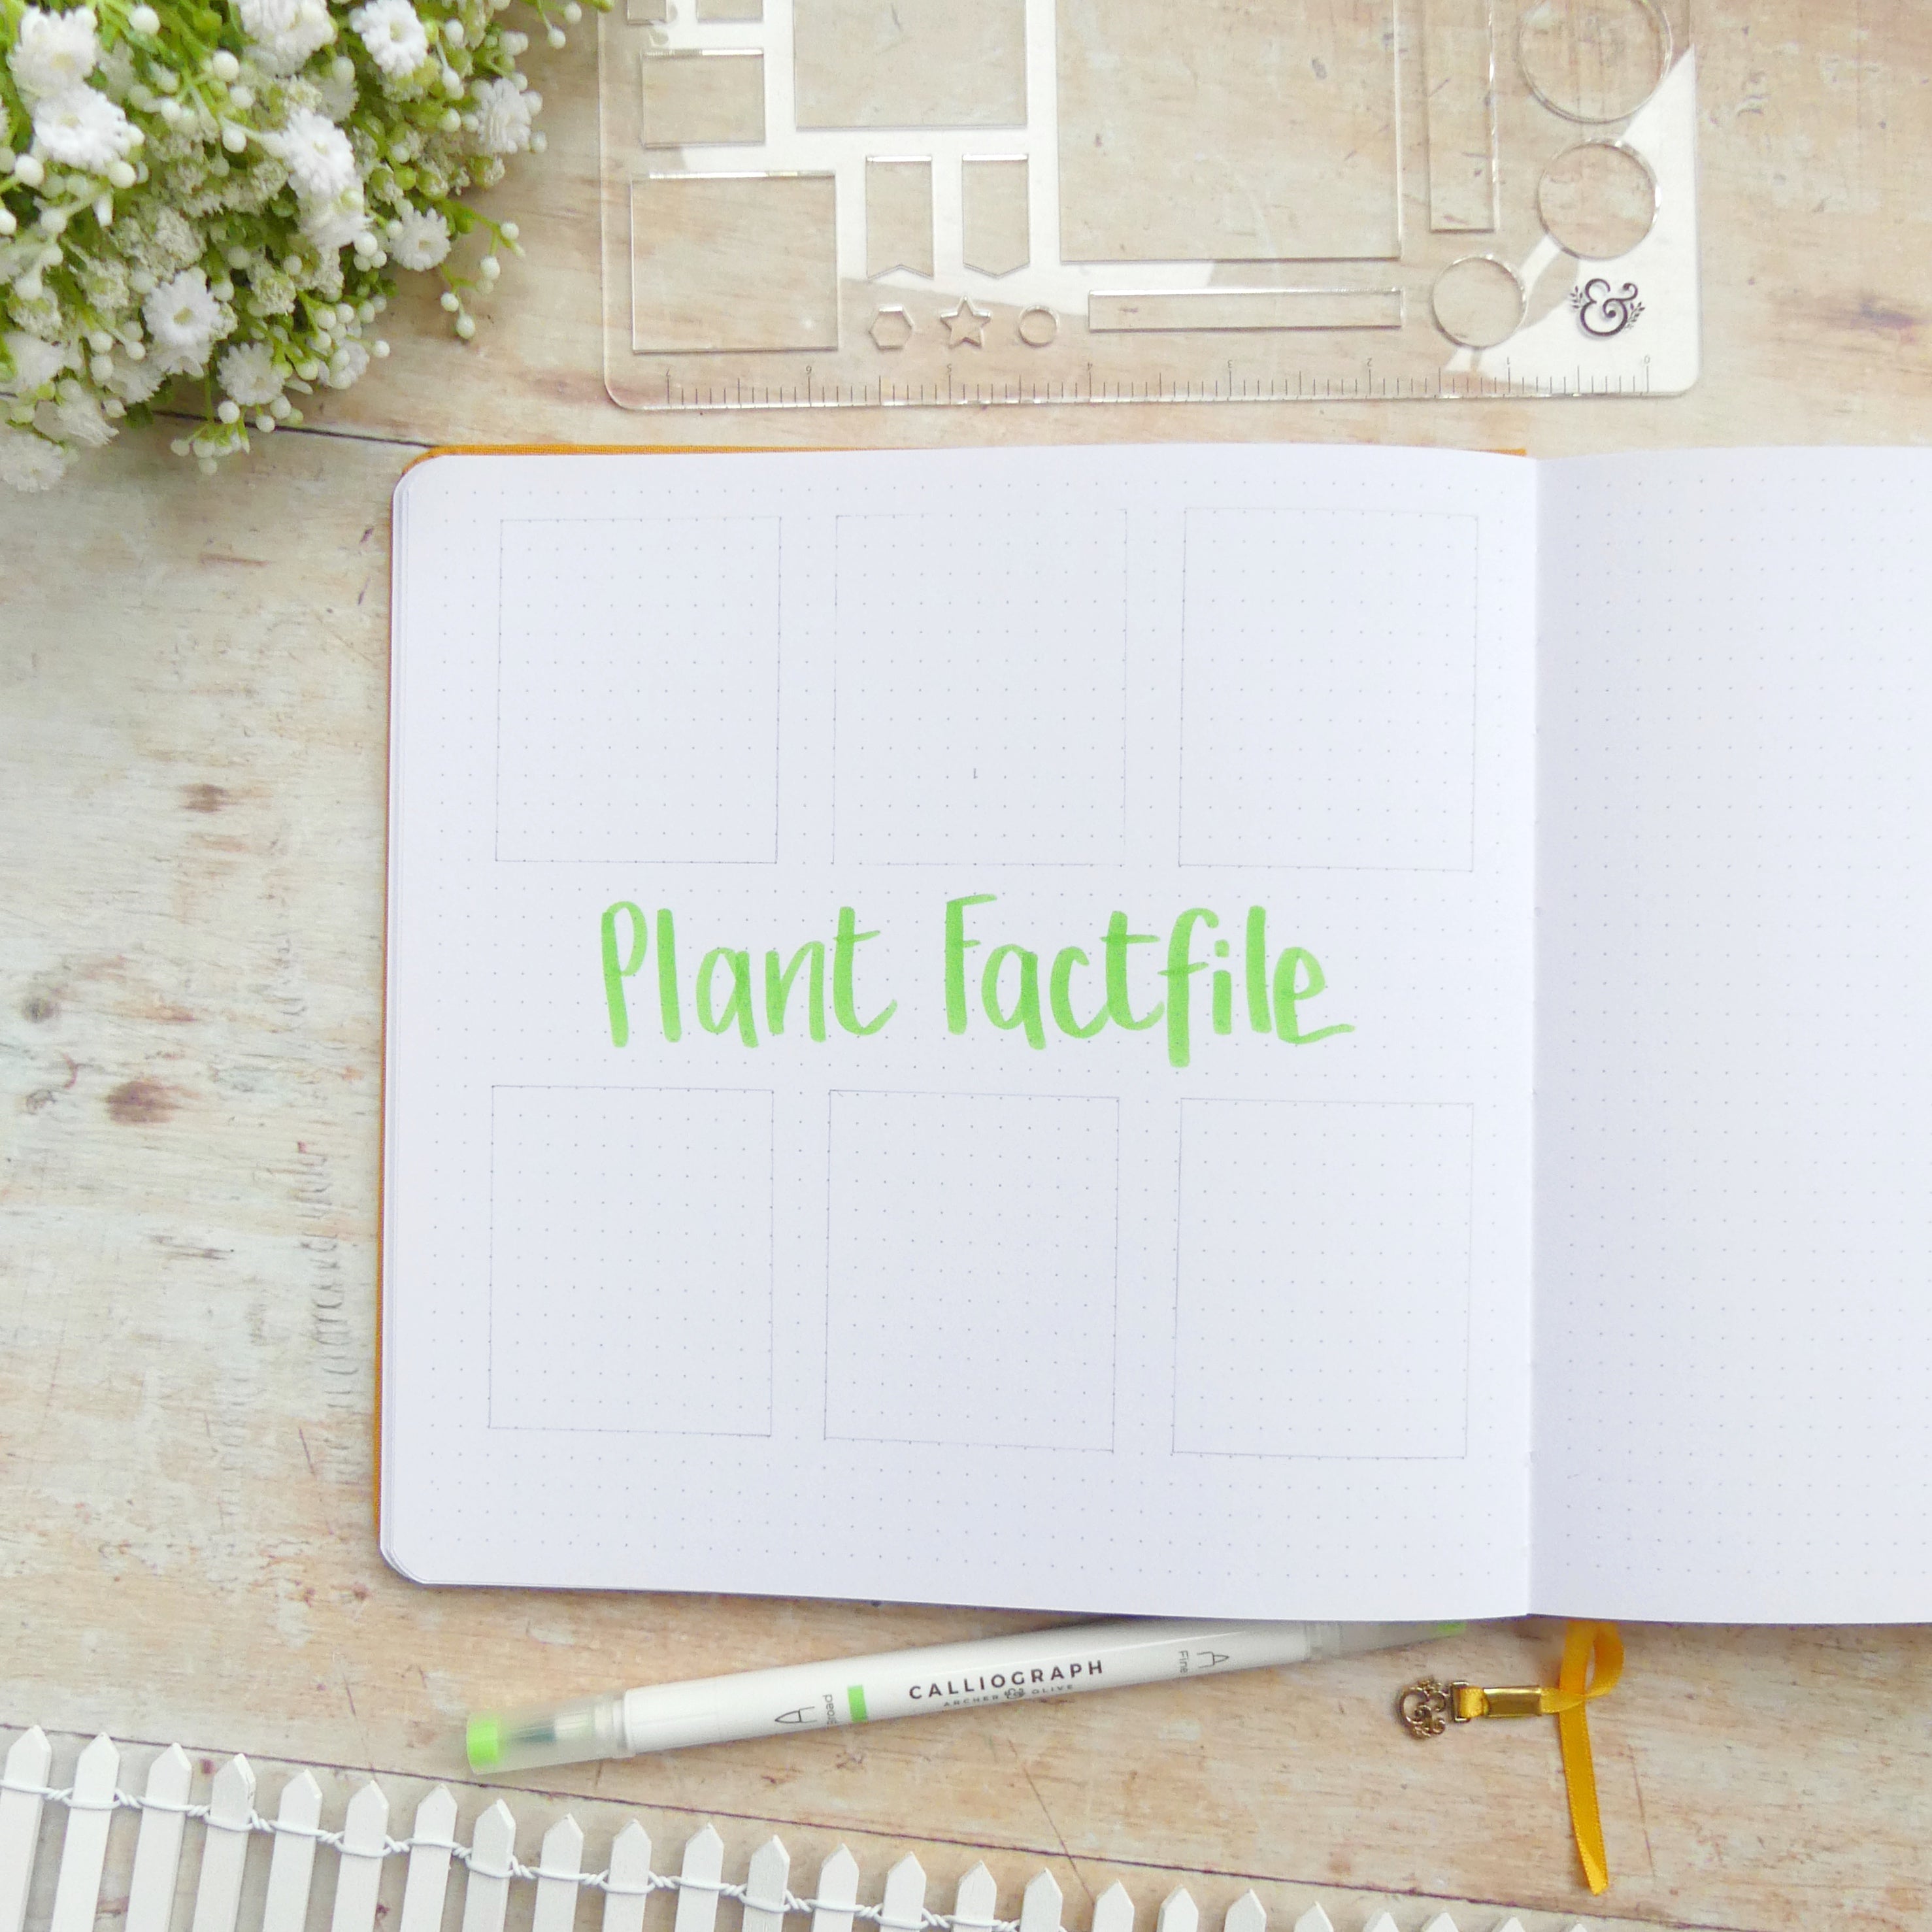 Open journal with title Plant fact file and outlined boxes